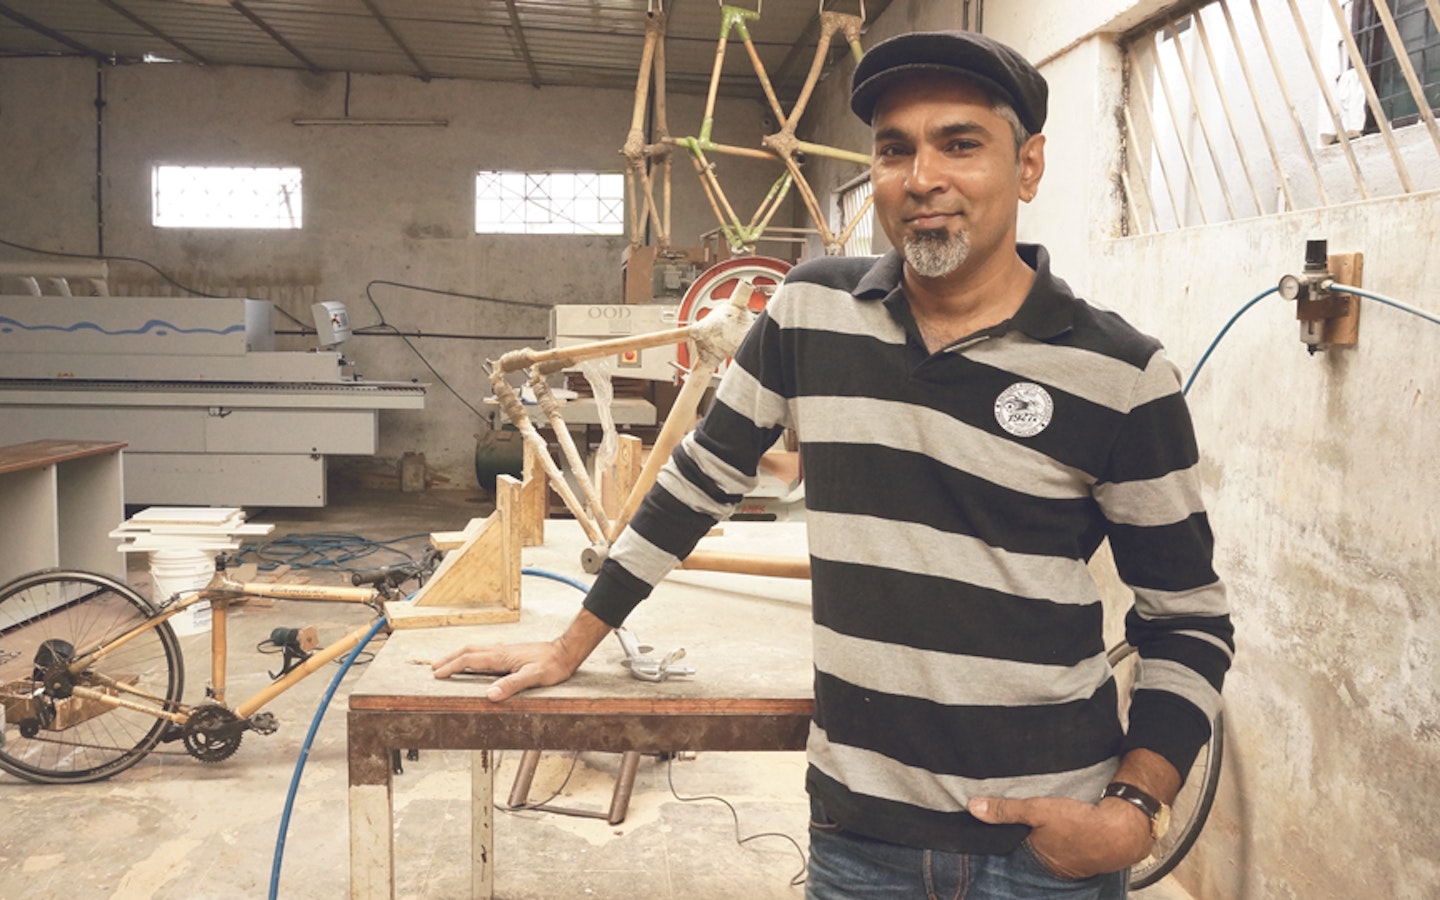 Learn bamboo bicycle making with Vijay in India.